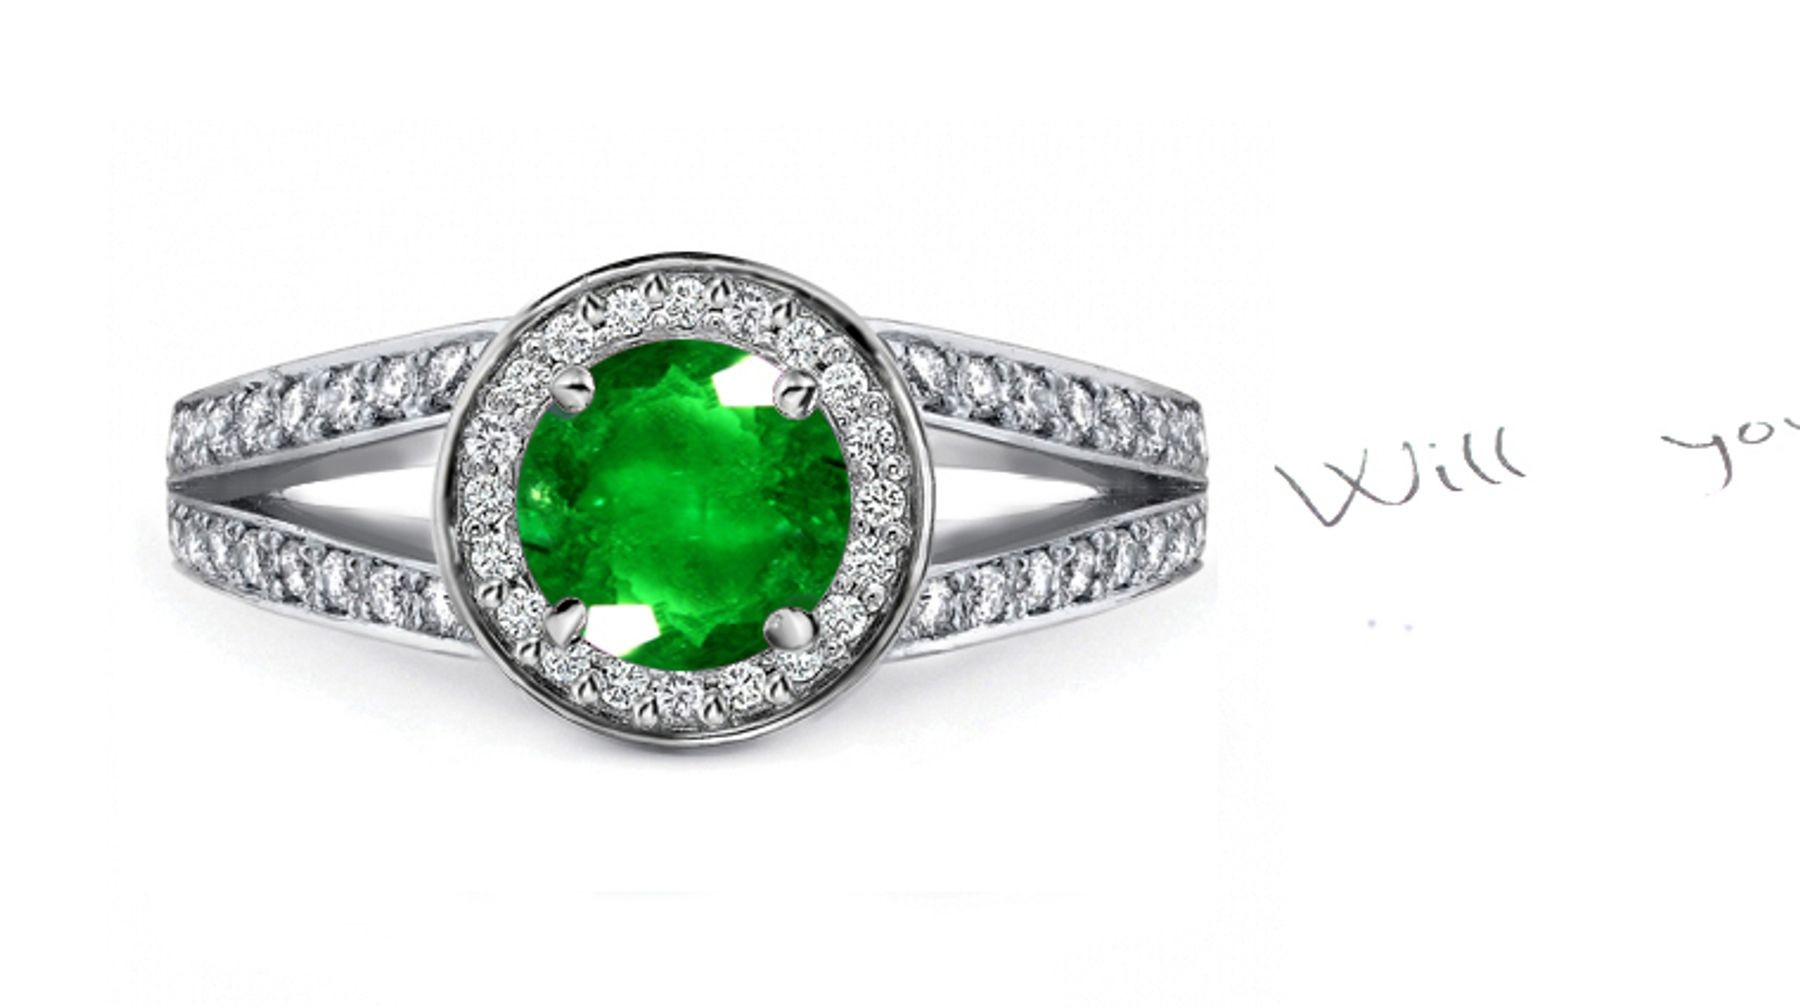 Single or Double Row: Shop On Sale! French Art Deco Pave' Emerald Diamond Gift Ring in 14k White Gold 